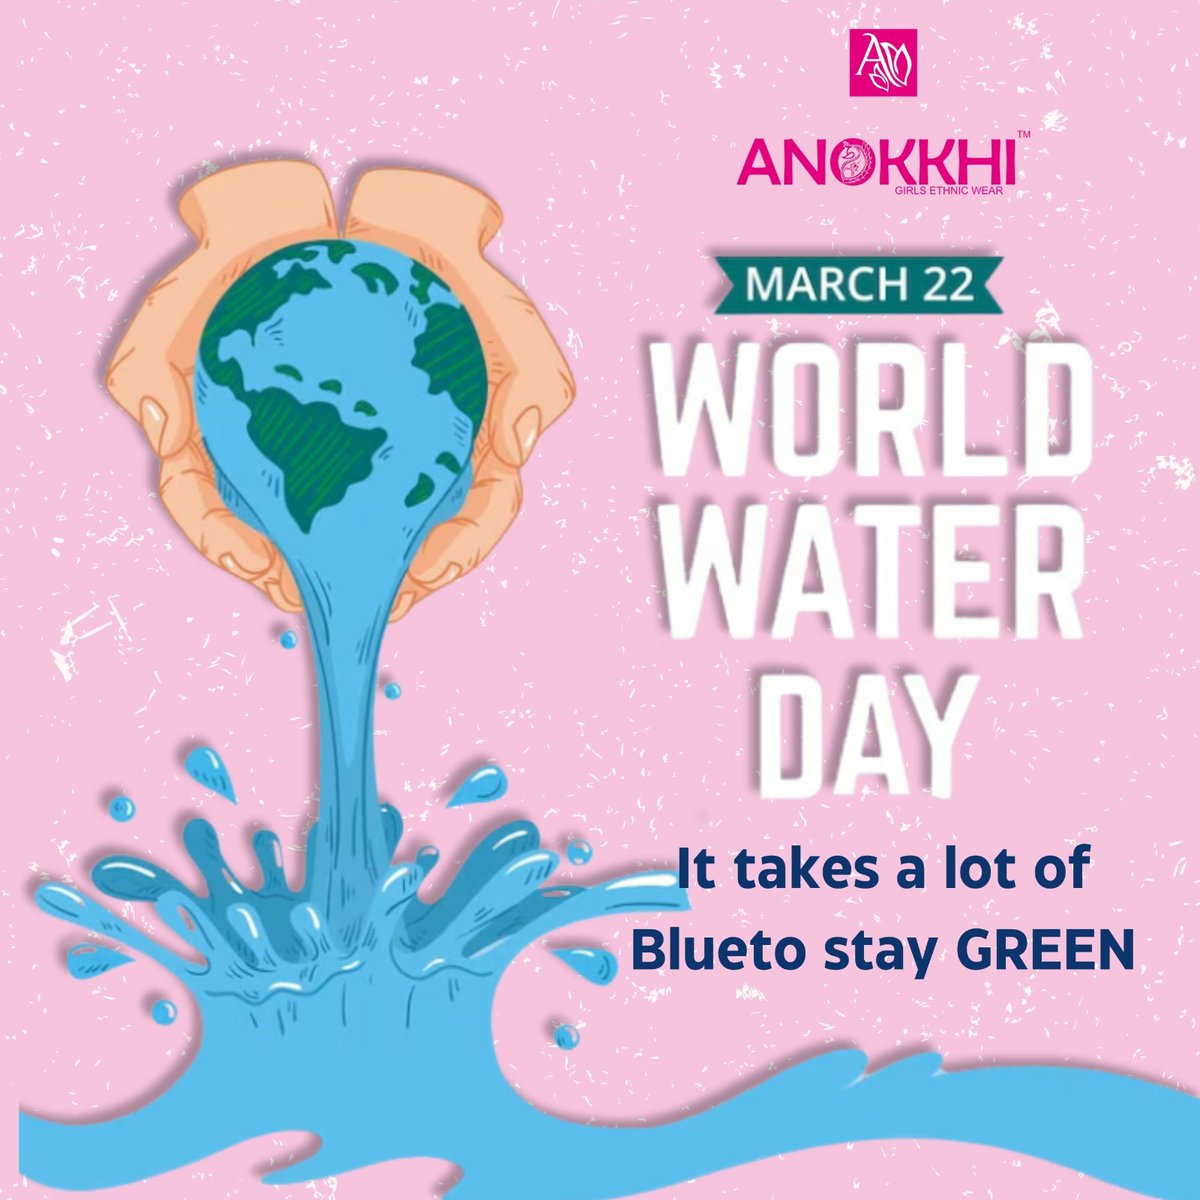 No matter, how much rich you are, you can't live without water. VWater is Life. Don't Waste It. 💧💧💦💦

#ANOKKHI
#worldwaterday #water #climatechange #all #climate #leavingnoonebehind #wwdphc